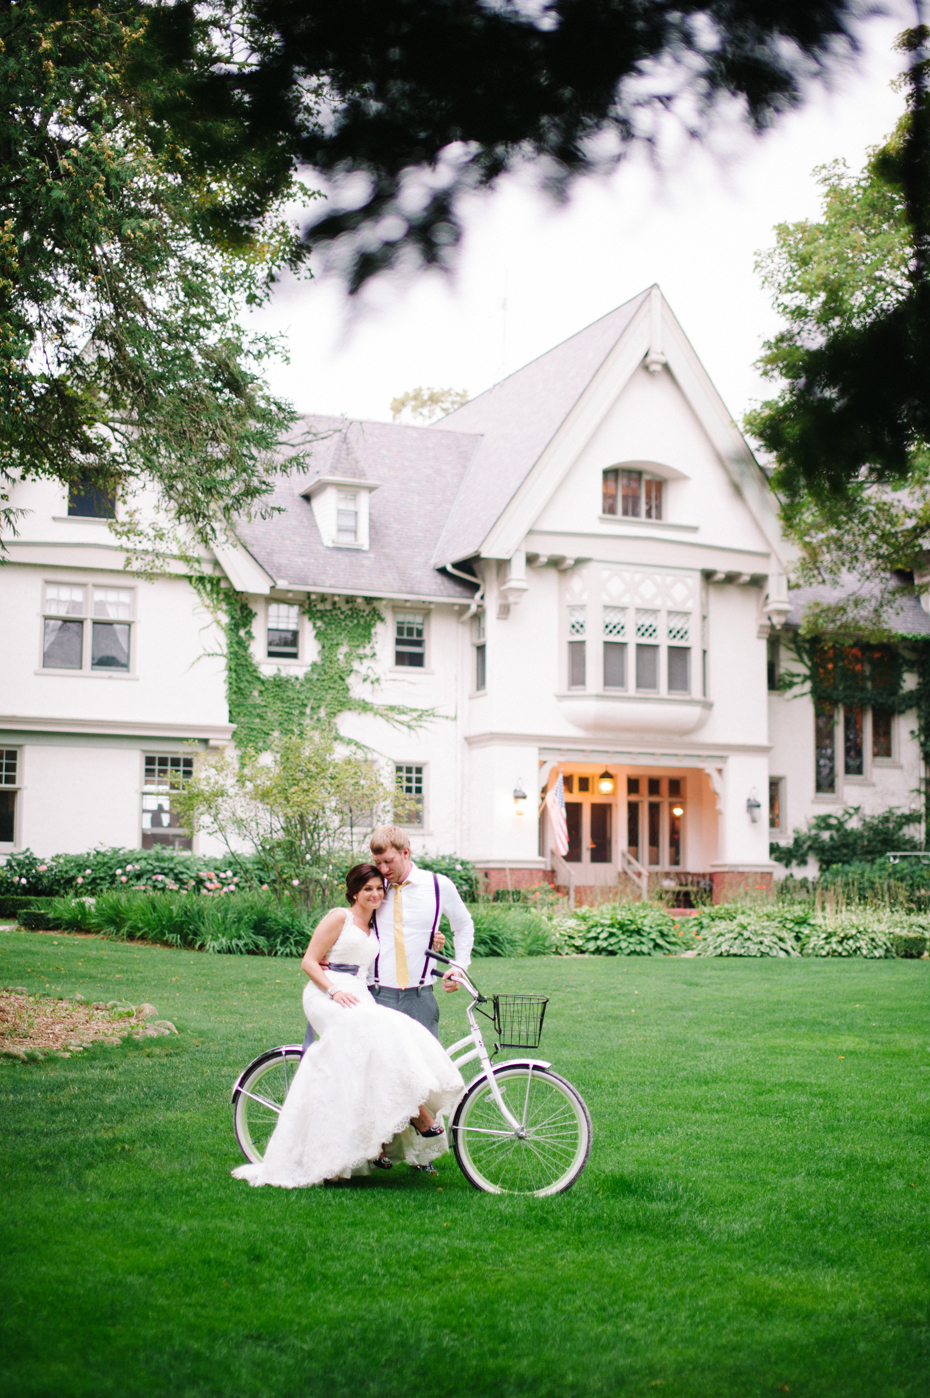 Bride and groom pose with bicycles on the front lawn during an outdoor wedding reception at The Inn at Stonecliffe on Mackinac Island by Ann Arbor Wedding Photographer Heather Jowett.